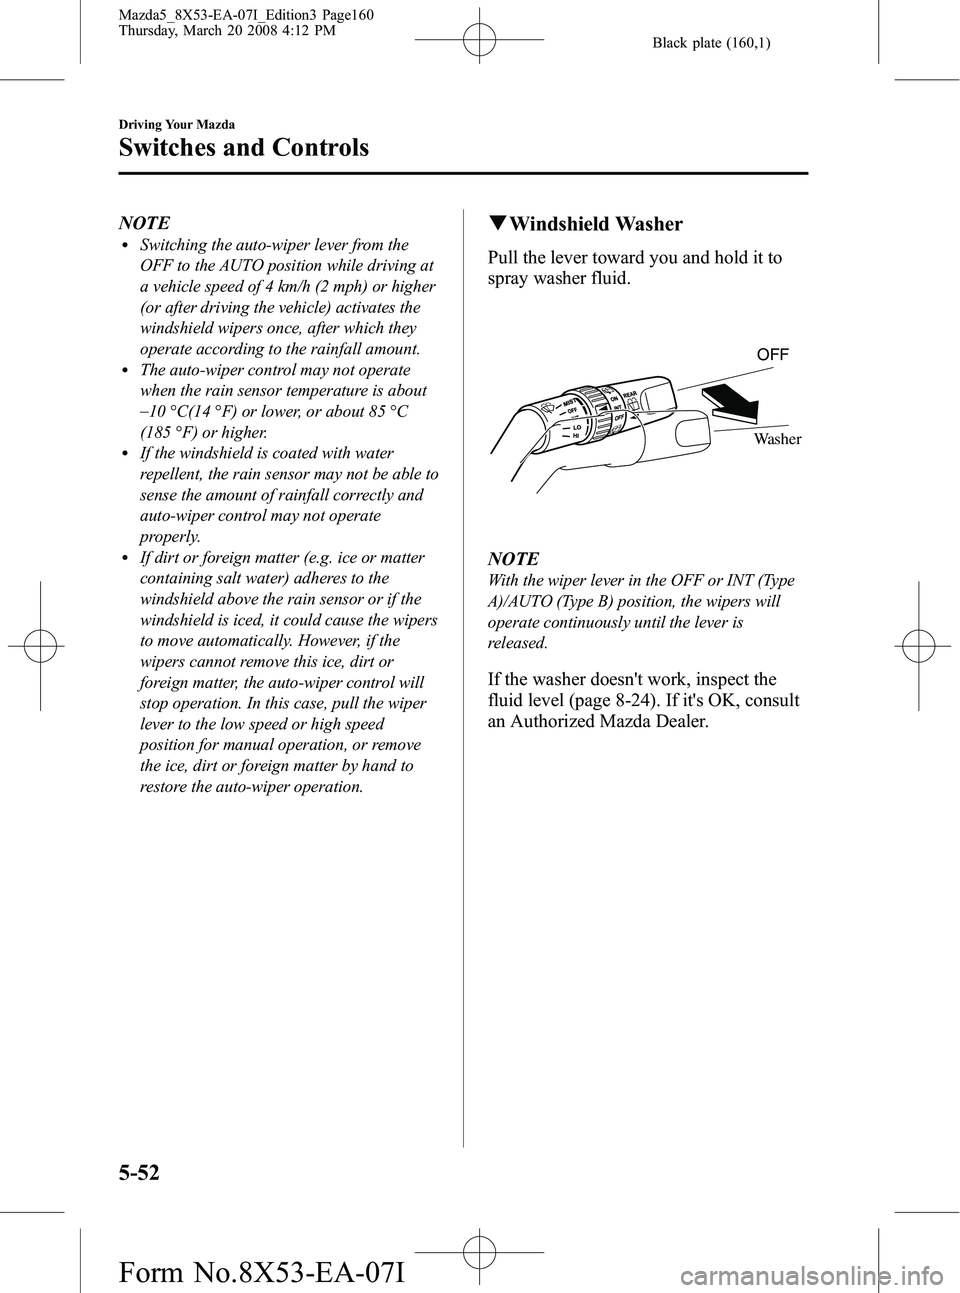 MAZDA MODEL 5 2008  Owners Manual Black plate (160,1)
NOTElSwitching the auto-wiper lever from the
OFF to the AUTO position while driving at
a vehicle speed of 4 km/h (2 mph) or higher
(or after driving the vehicle) activates the
wind